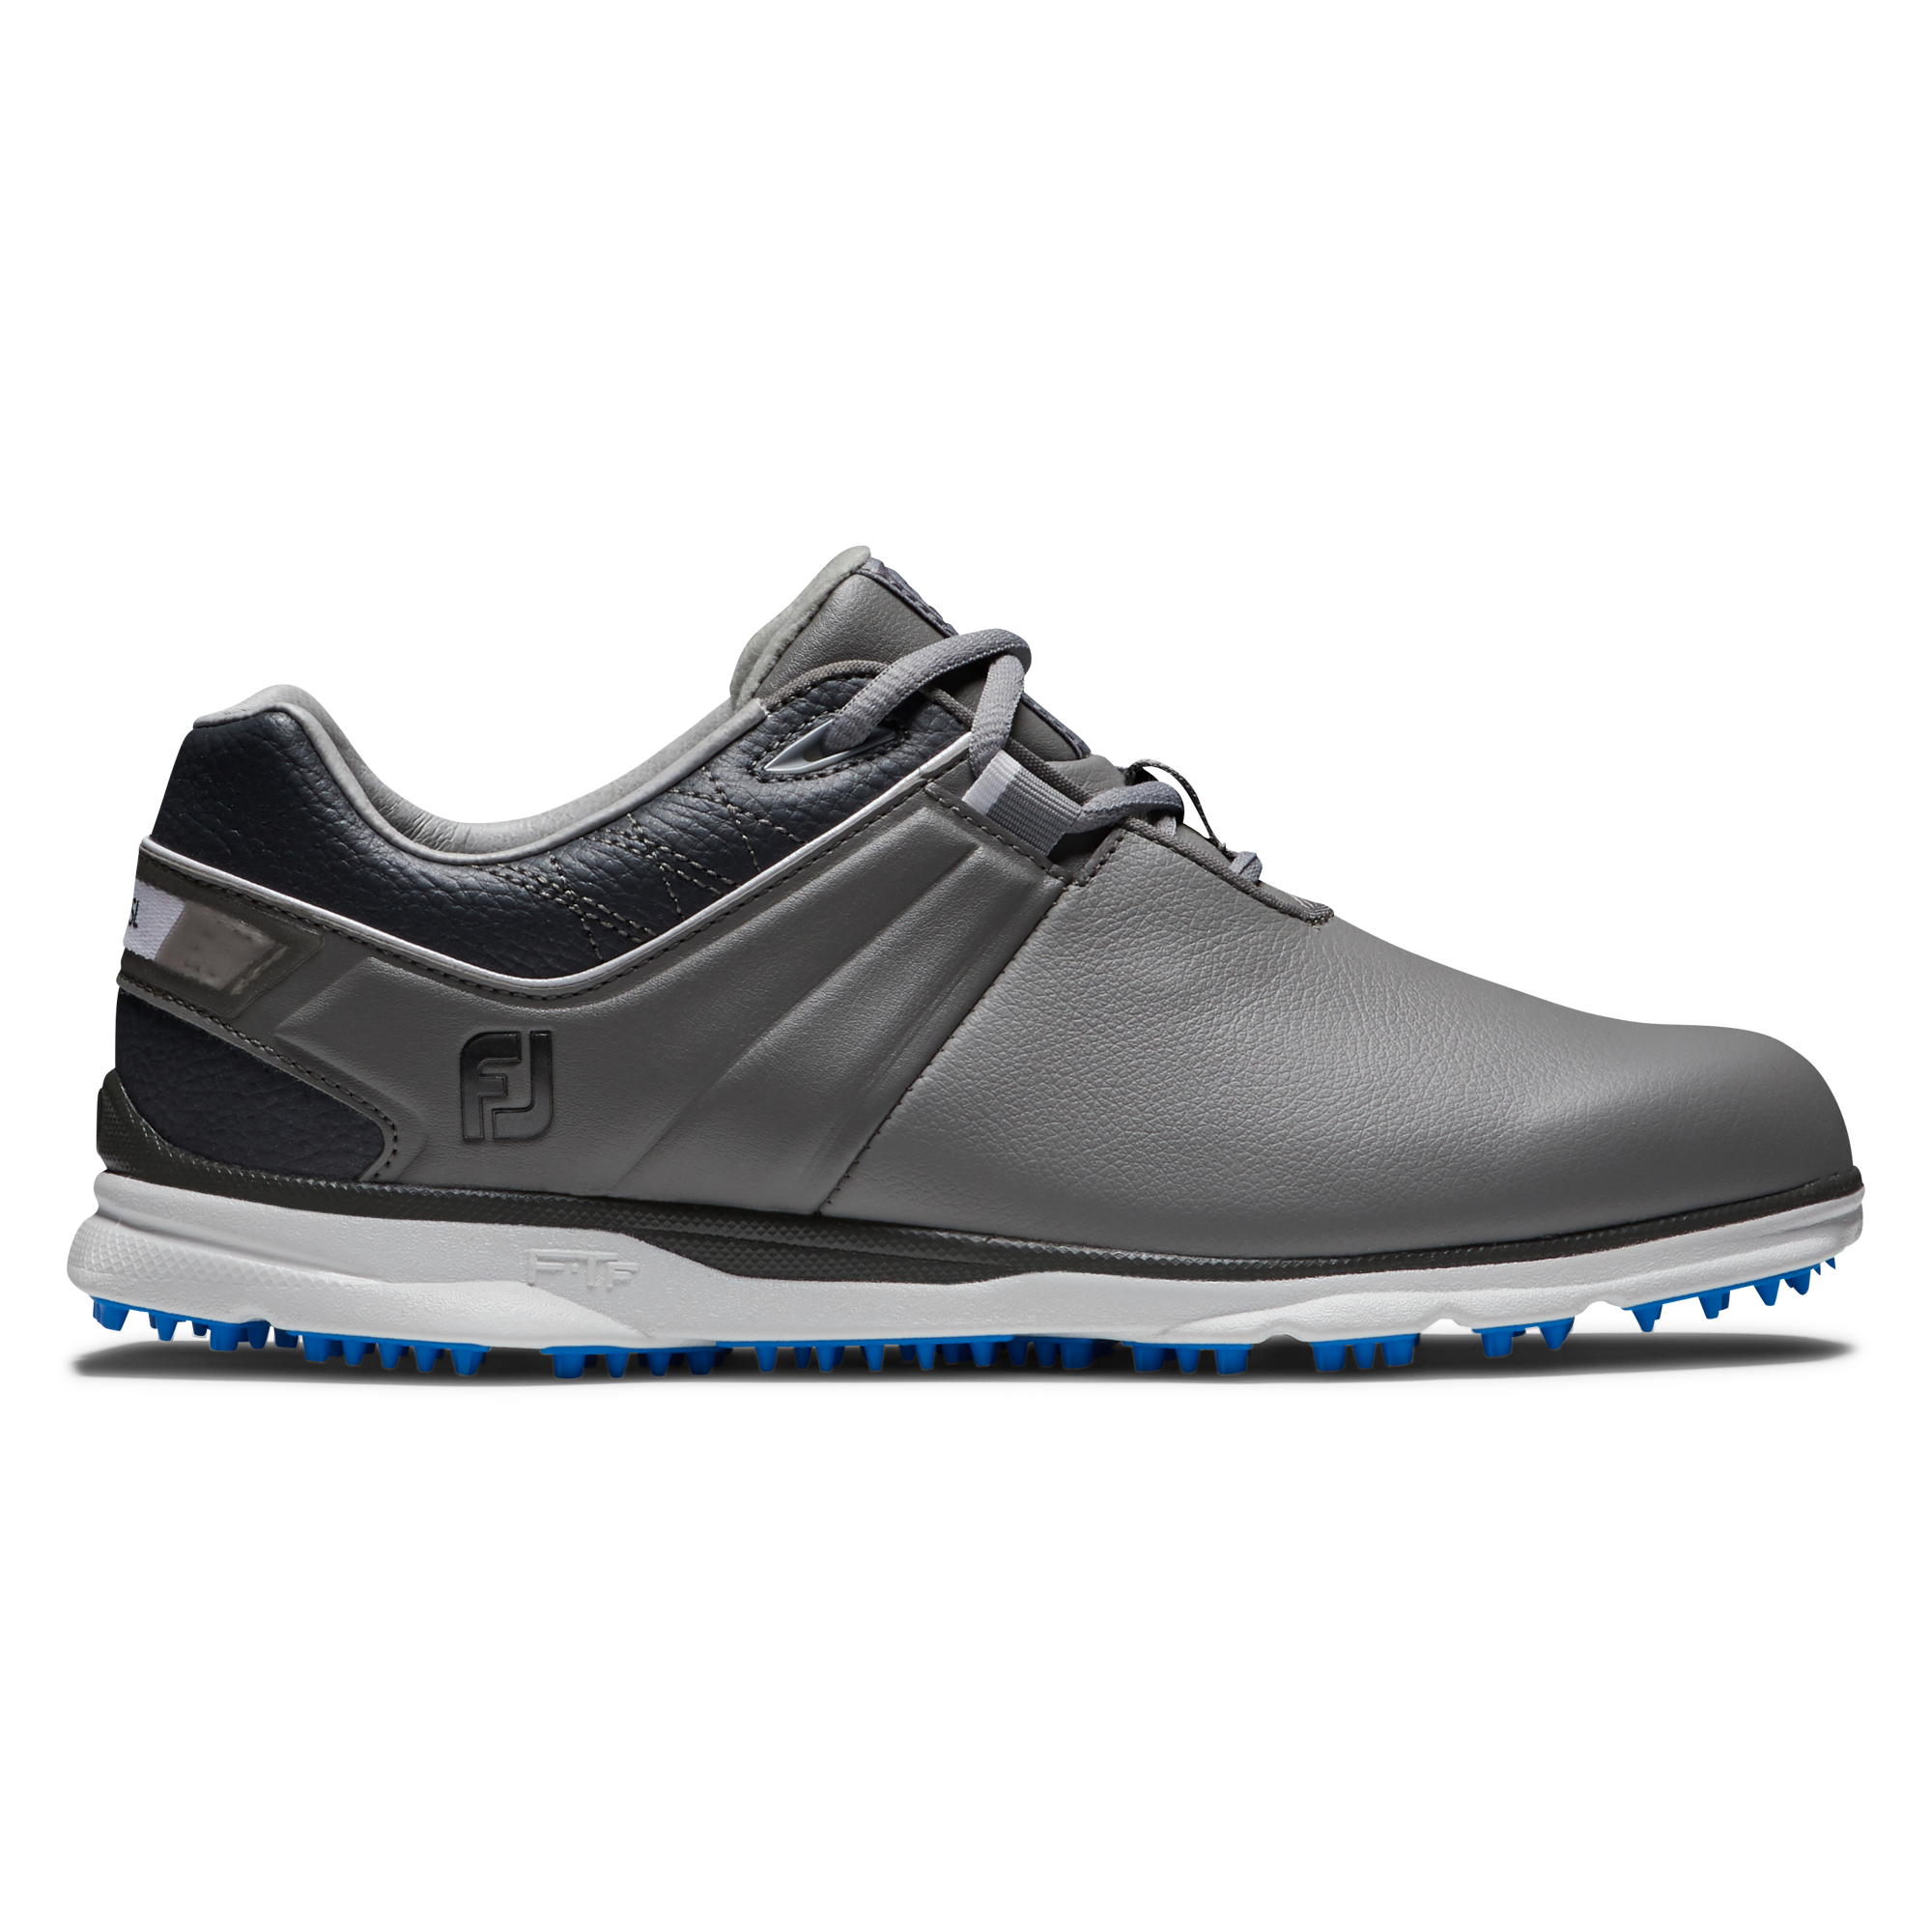 FootJoy introduces all-new Pro|SL Sport to their range of footwear |  GolfMagic